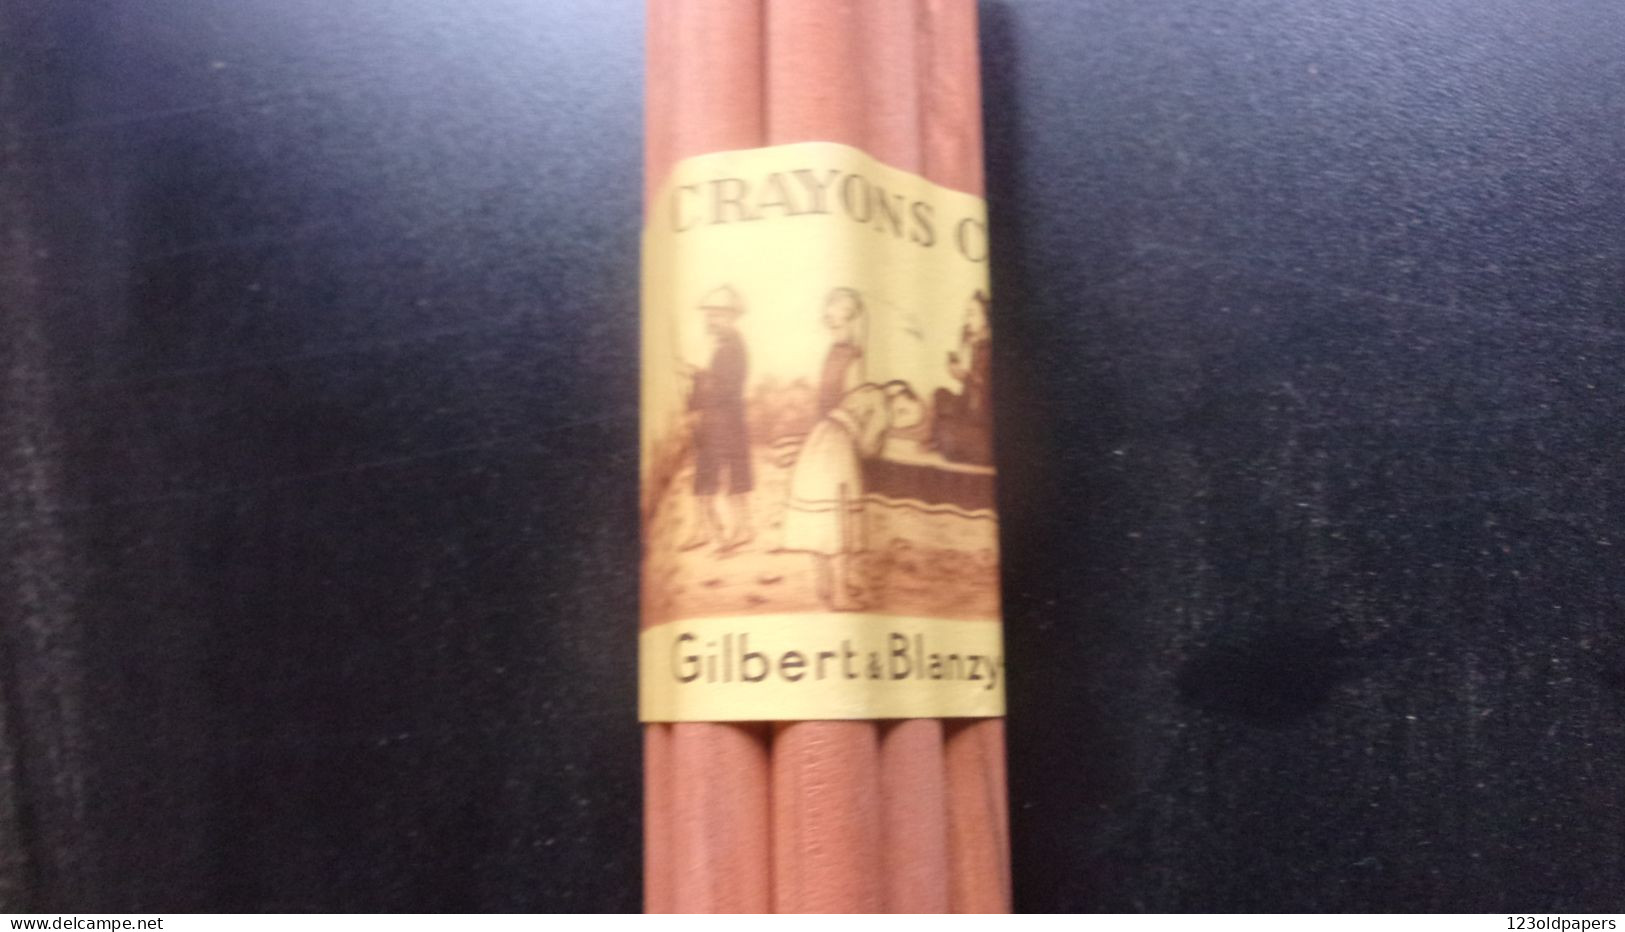 ️ RARE COMME NEUF   GILBERT BLANZY POURE CRAYONS CHINOIS ENSEMBLE NON OUVERT 12 CRAYONS N°2 - Pens